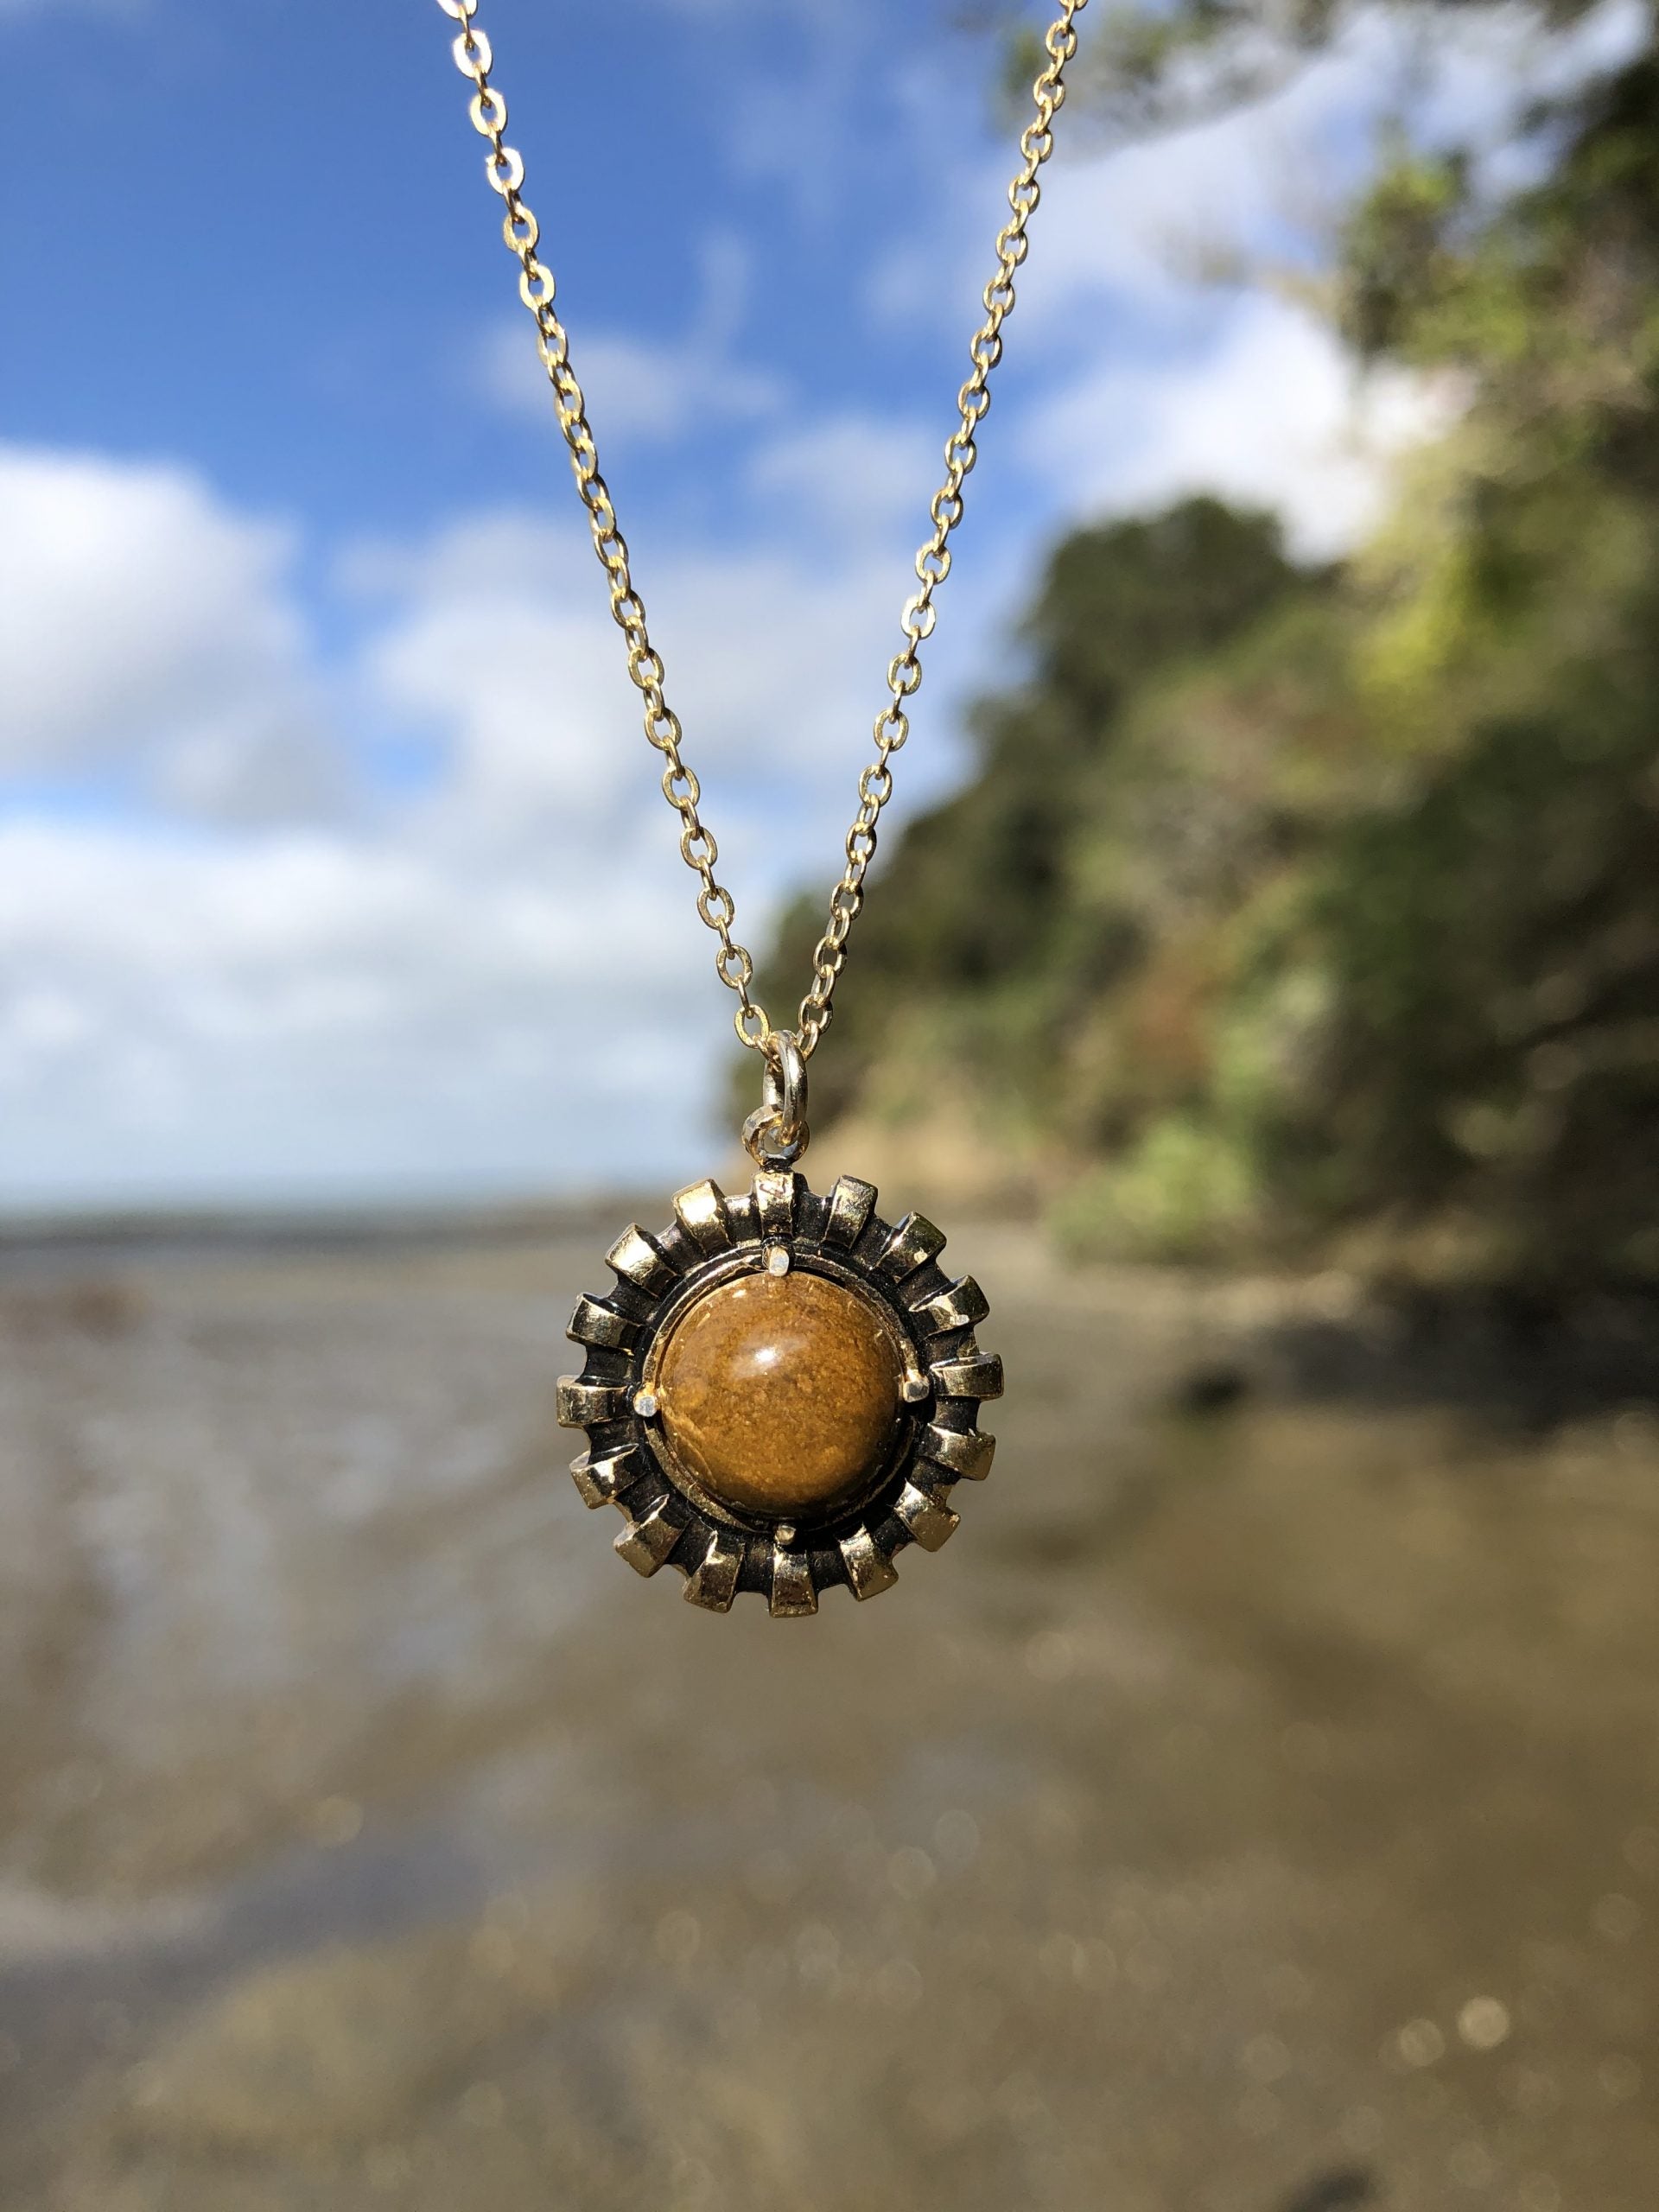 Necklace with natural Fossil Chert from Coromandel New Zealand, with tiny micro-fossils in a brown background, cut to a 10mm round cabochon and set in a gold plated setting with 19 inch chain.